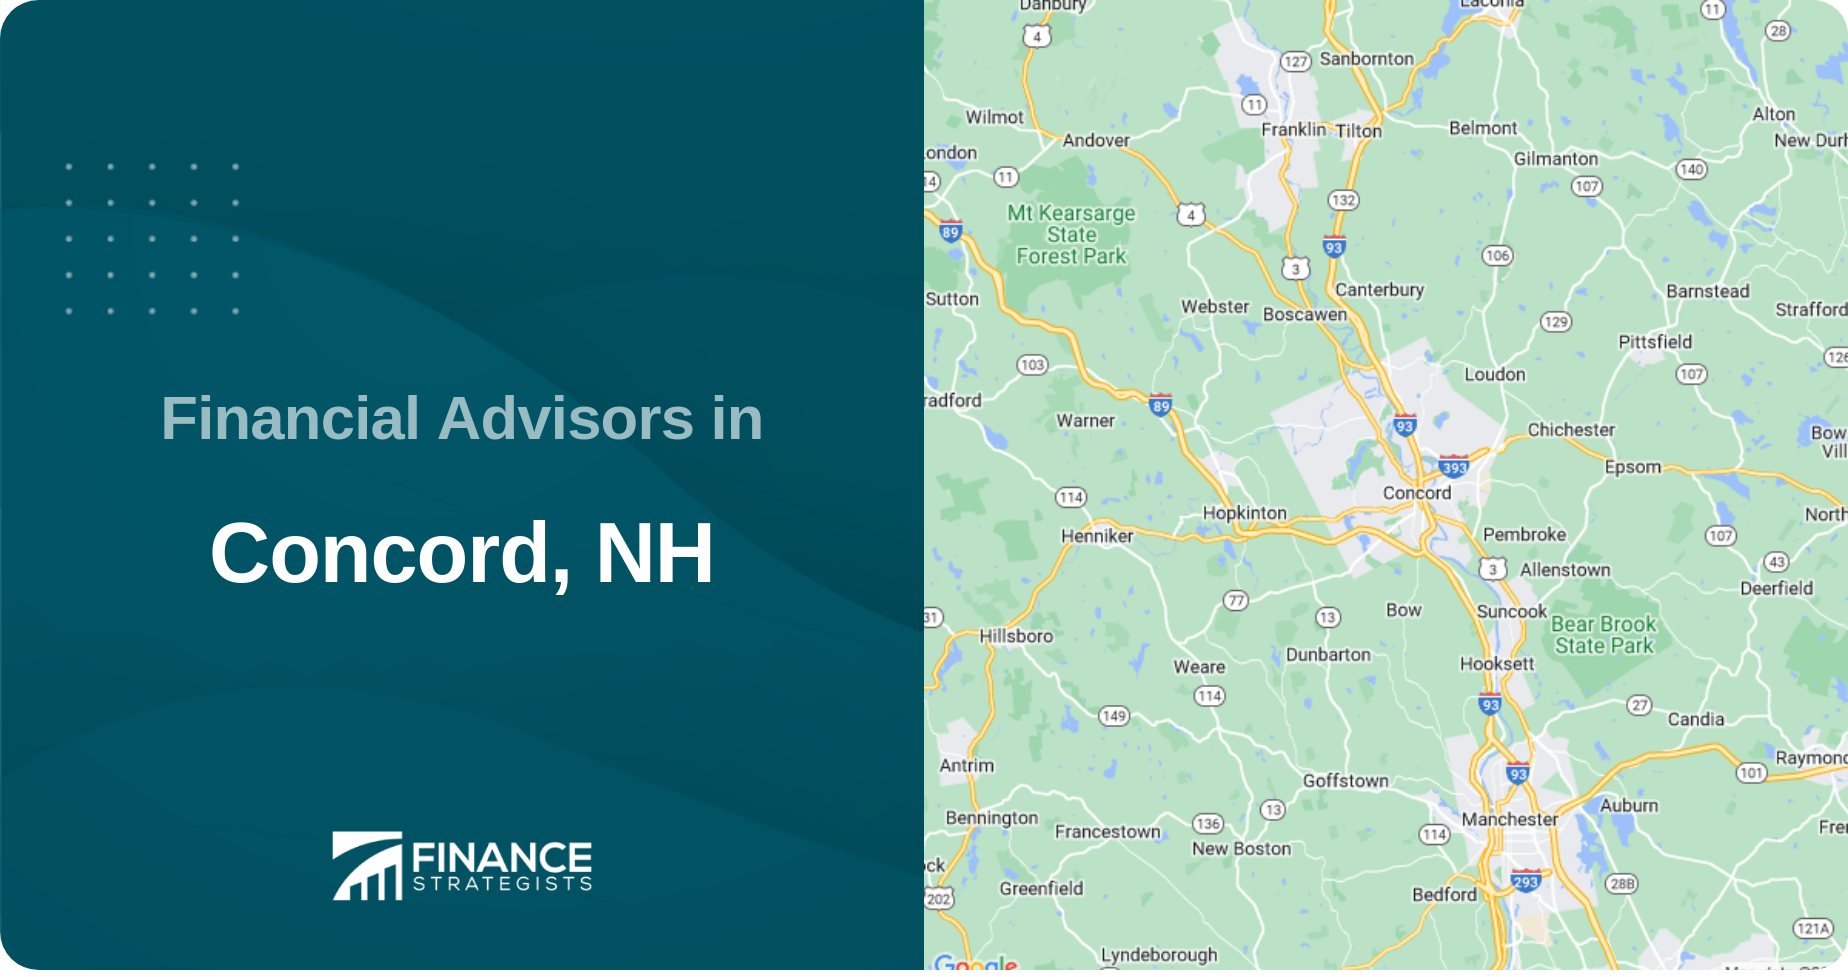 Financial Advisors in Concord, NH